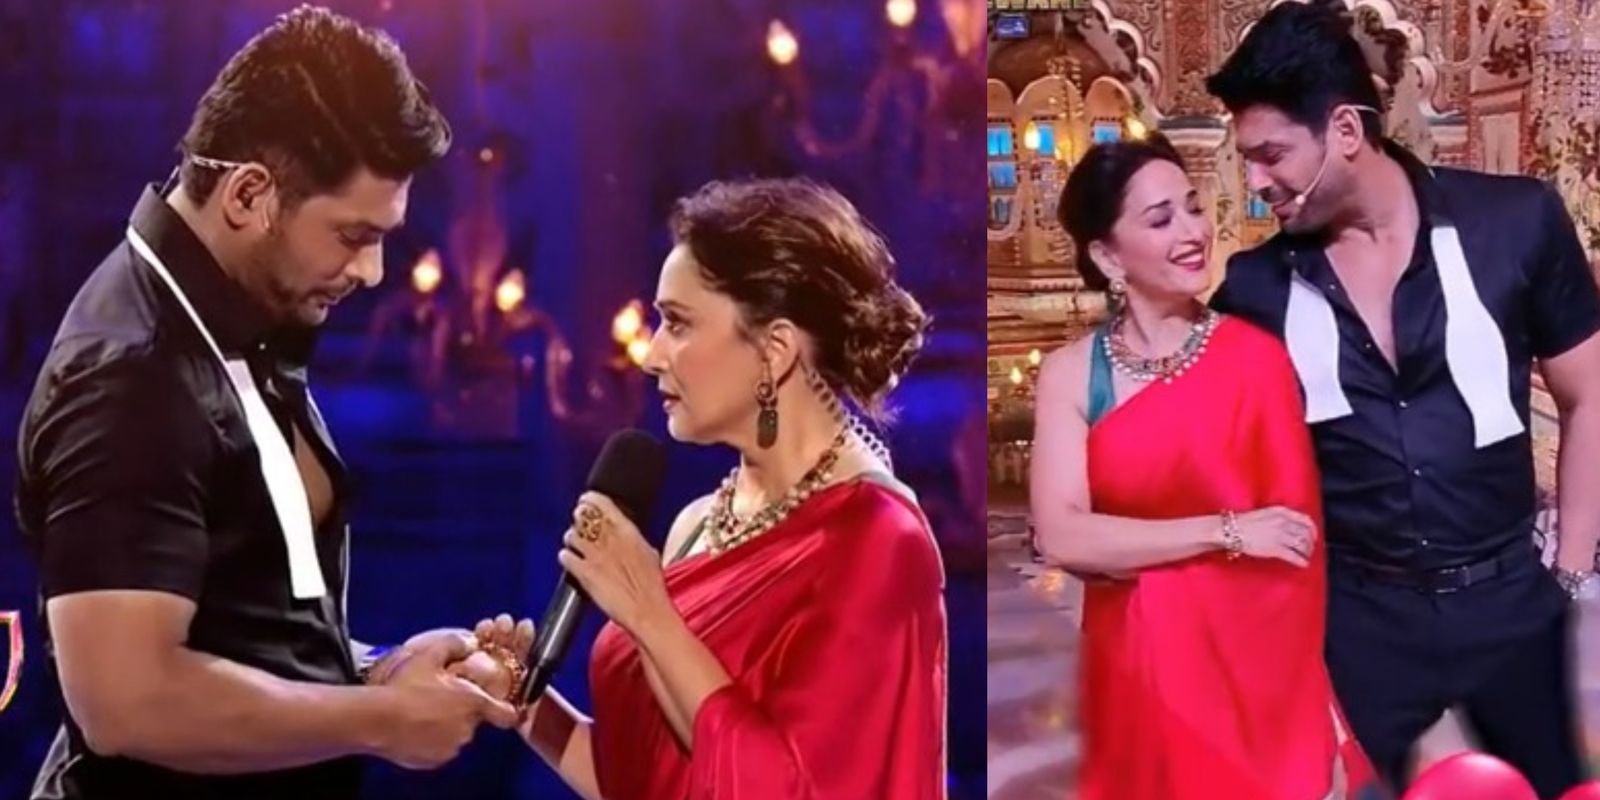 Madhuri Dixit recreates an iconic scene from Dil To Pagal Hai with Sidharth Shukla on Dance Deewane 3